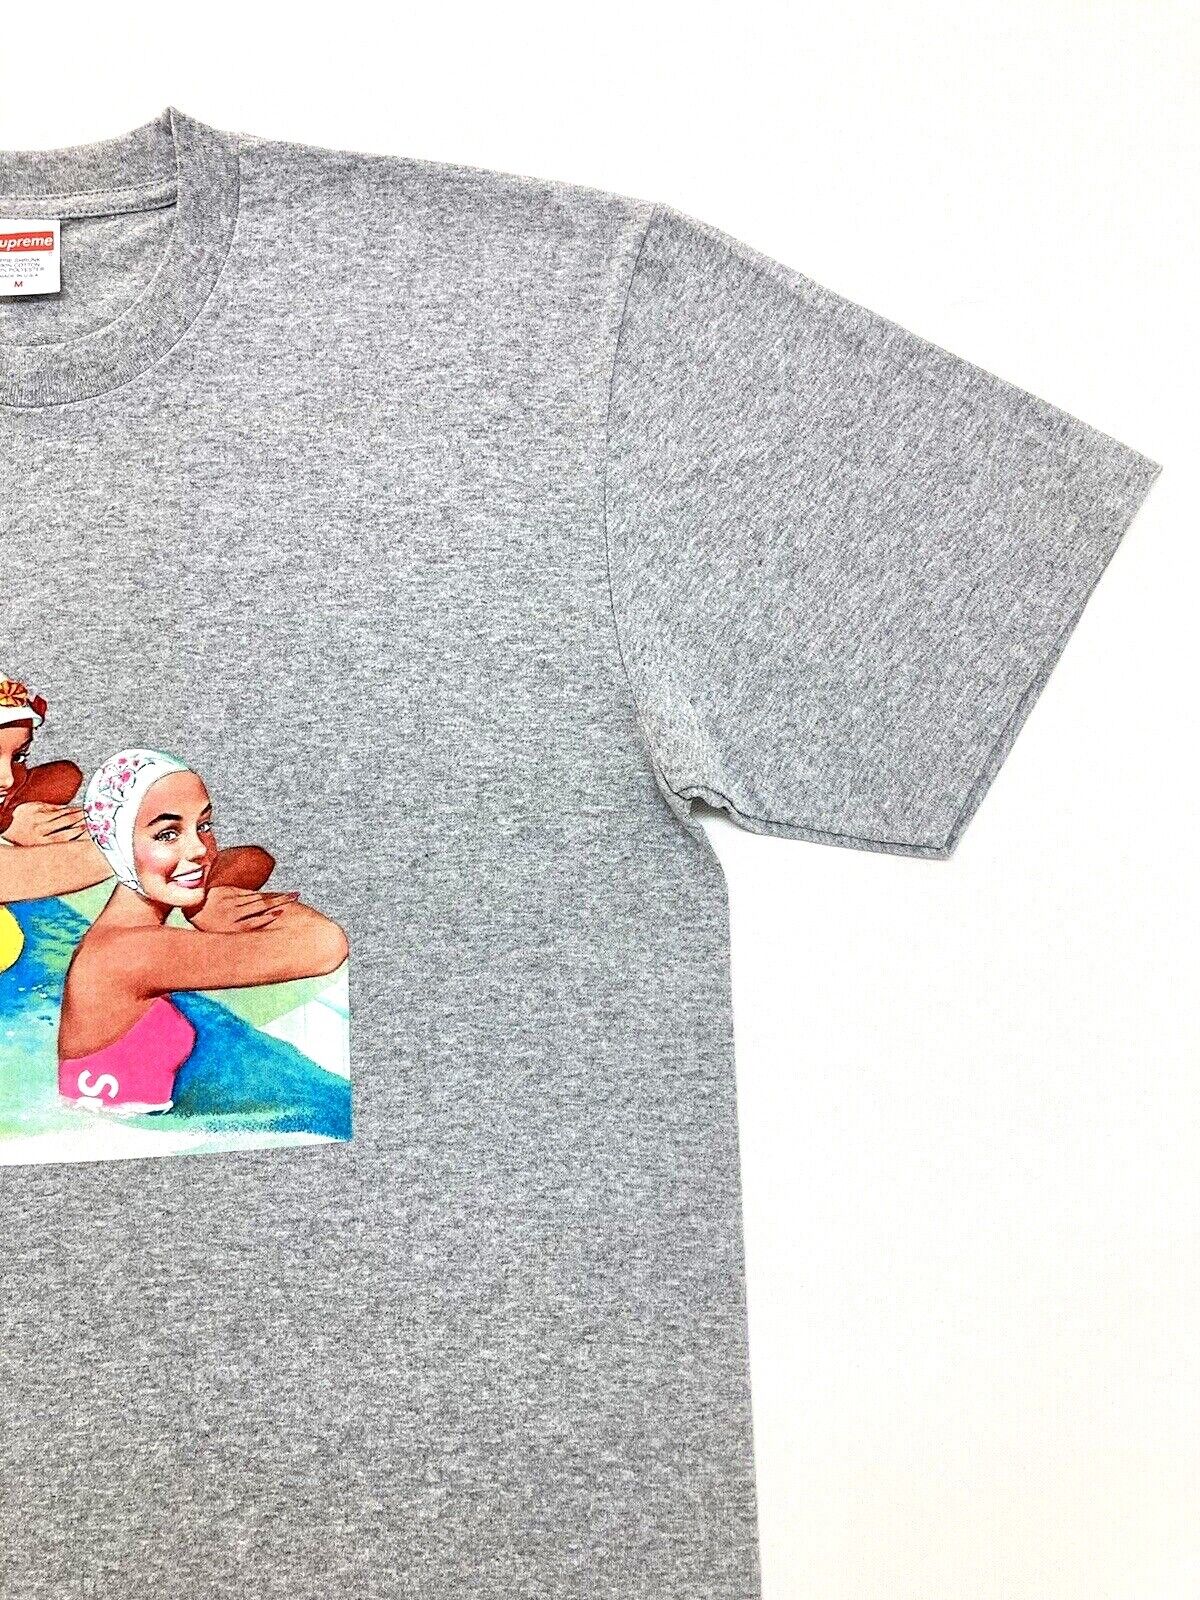 Supreme Swimmers Tee Heather Grey Size M SS18 T-Shirt